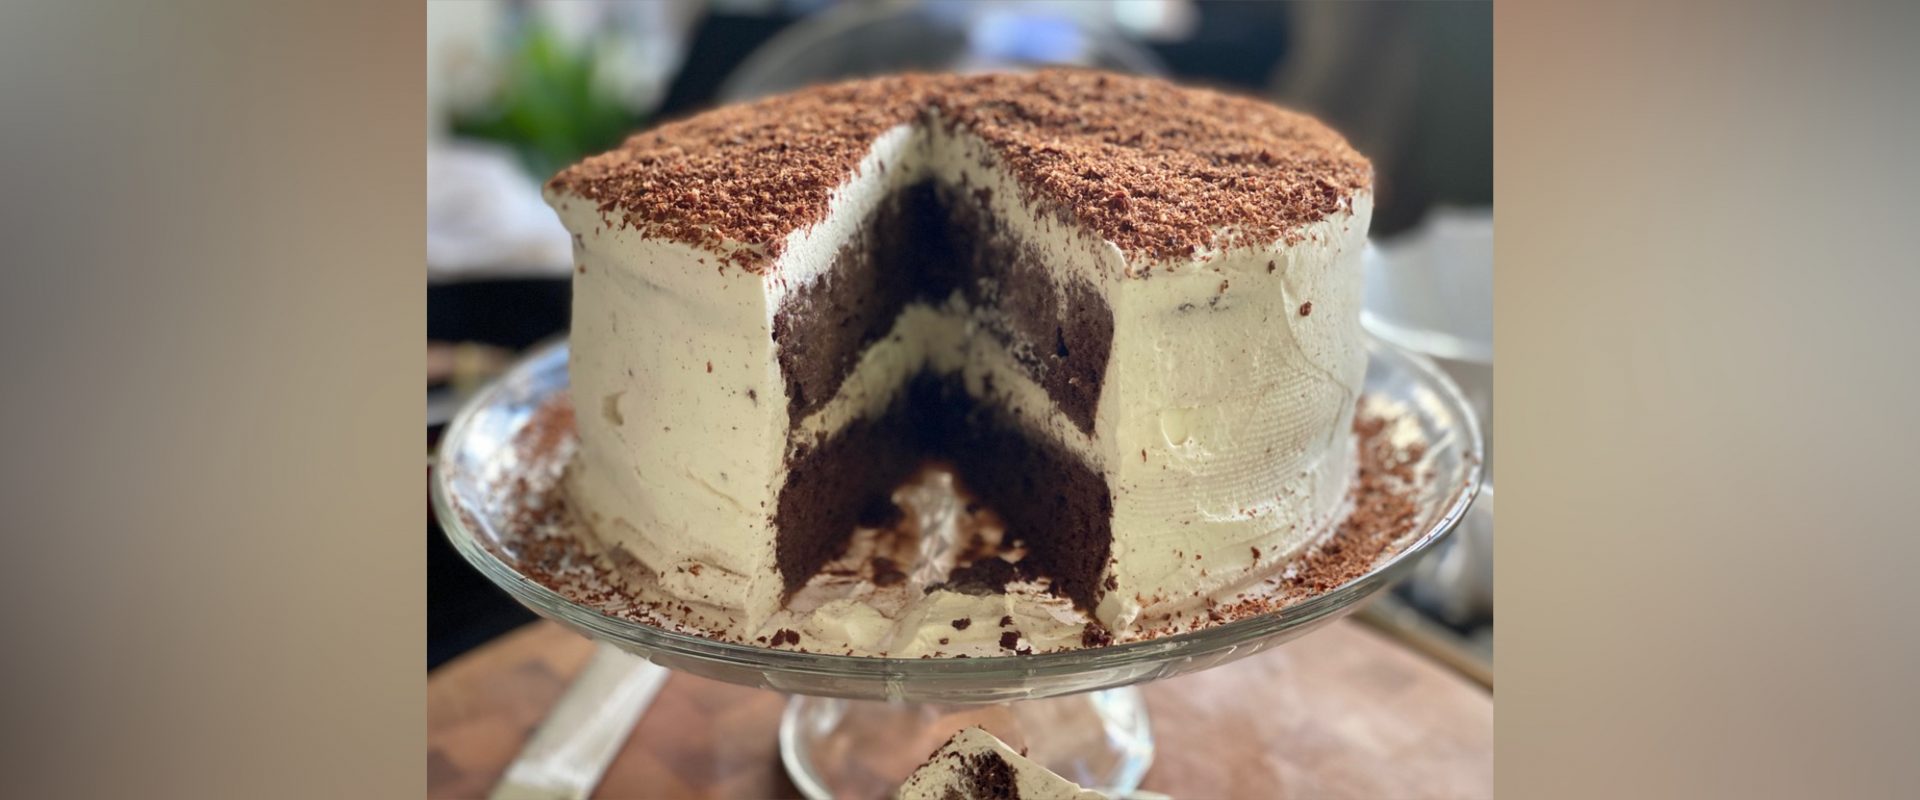 Permalink to: Chocolate Rum Tres Leches Cake